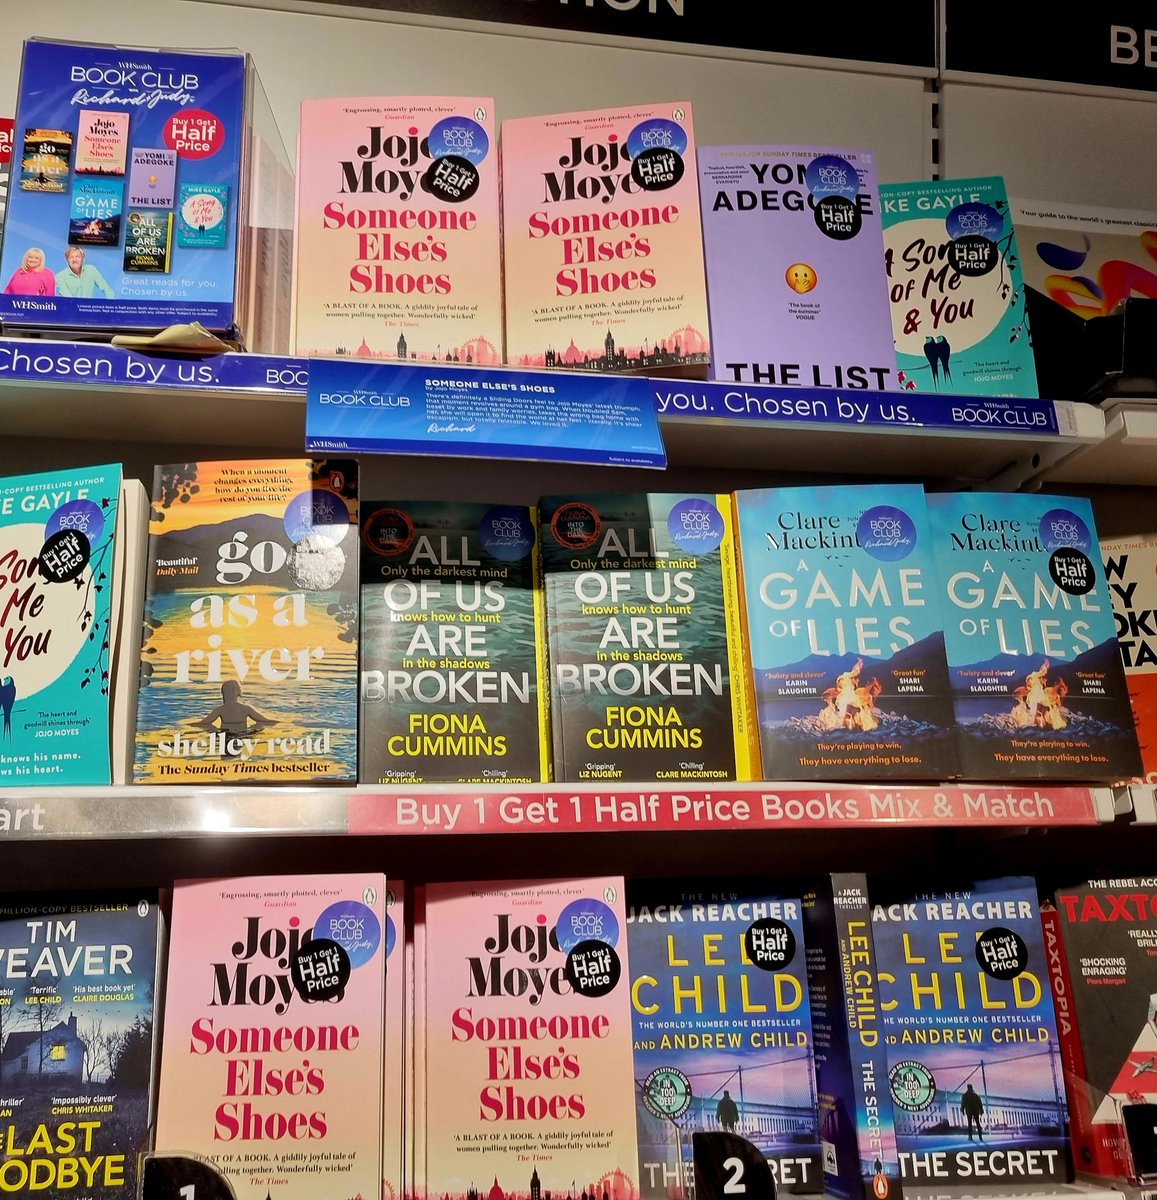 What a stack of books! Fab to see this lovely pile at @WHSmith in Stansted airport. And on the shelves at Waterloo station.